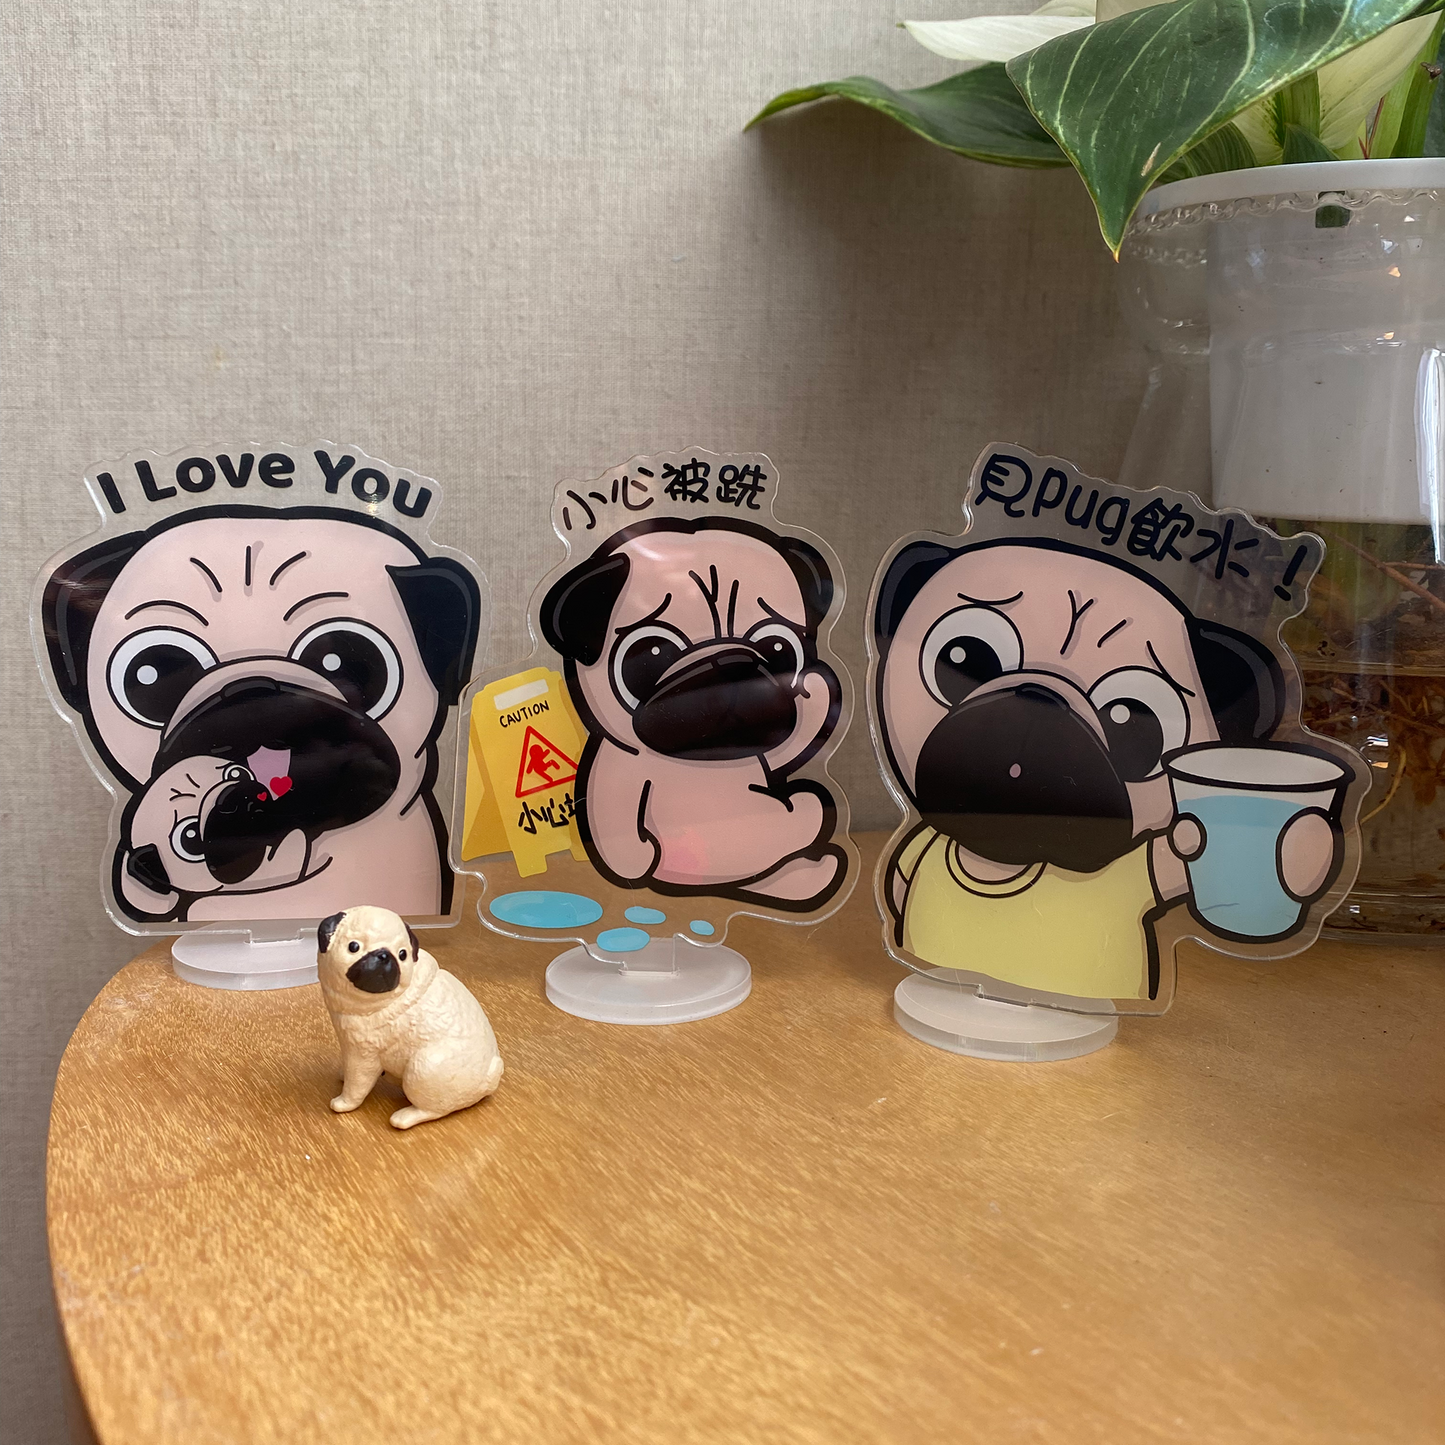 Caution: slippery, Mike the puggy double-sided message stand